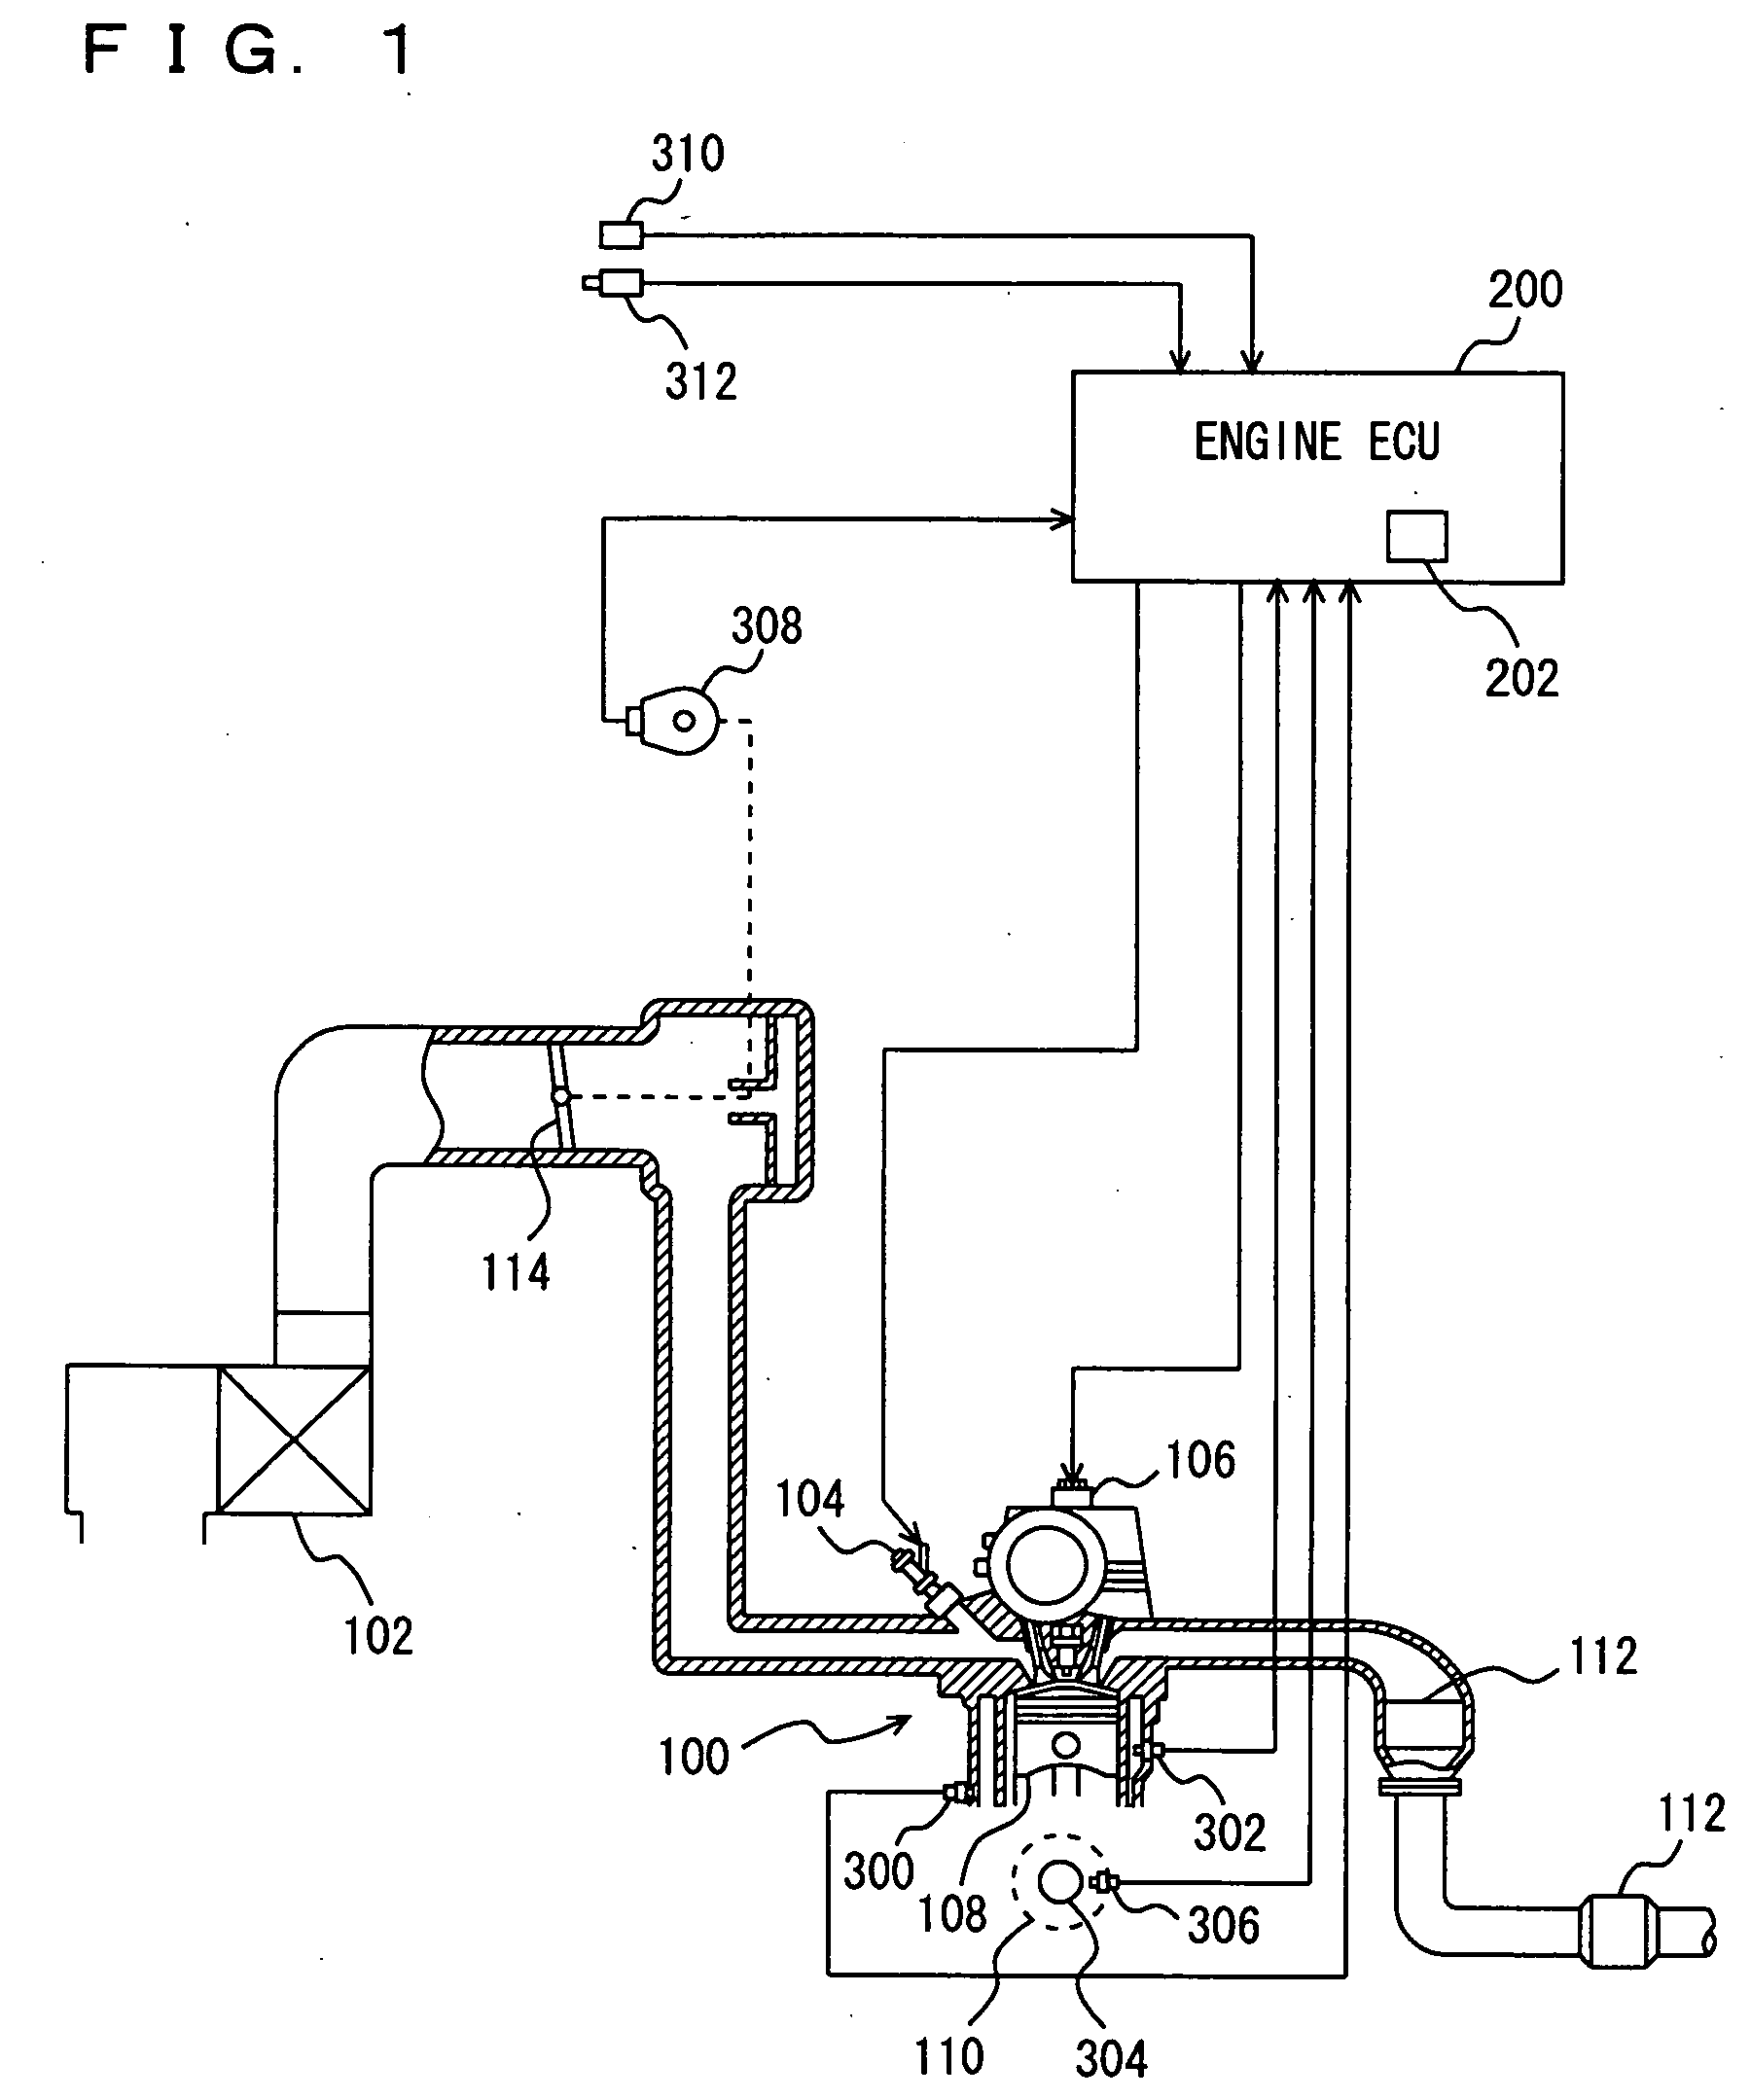 Knock determination device for internal combustion engine